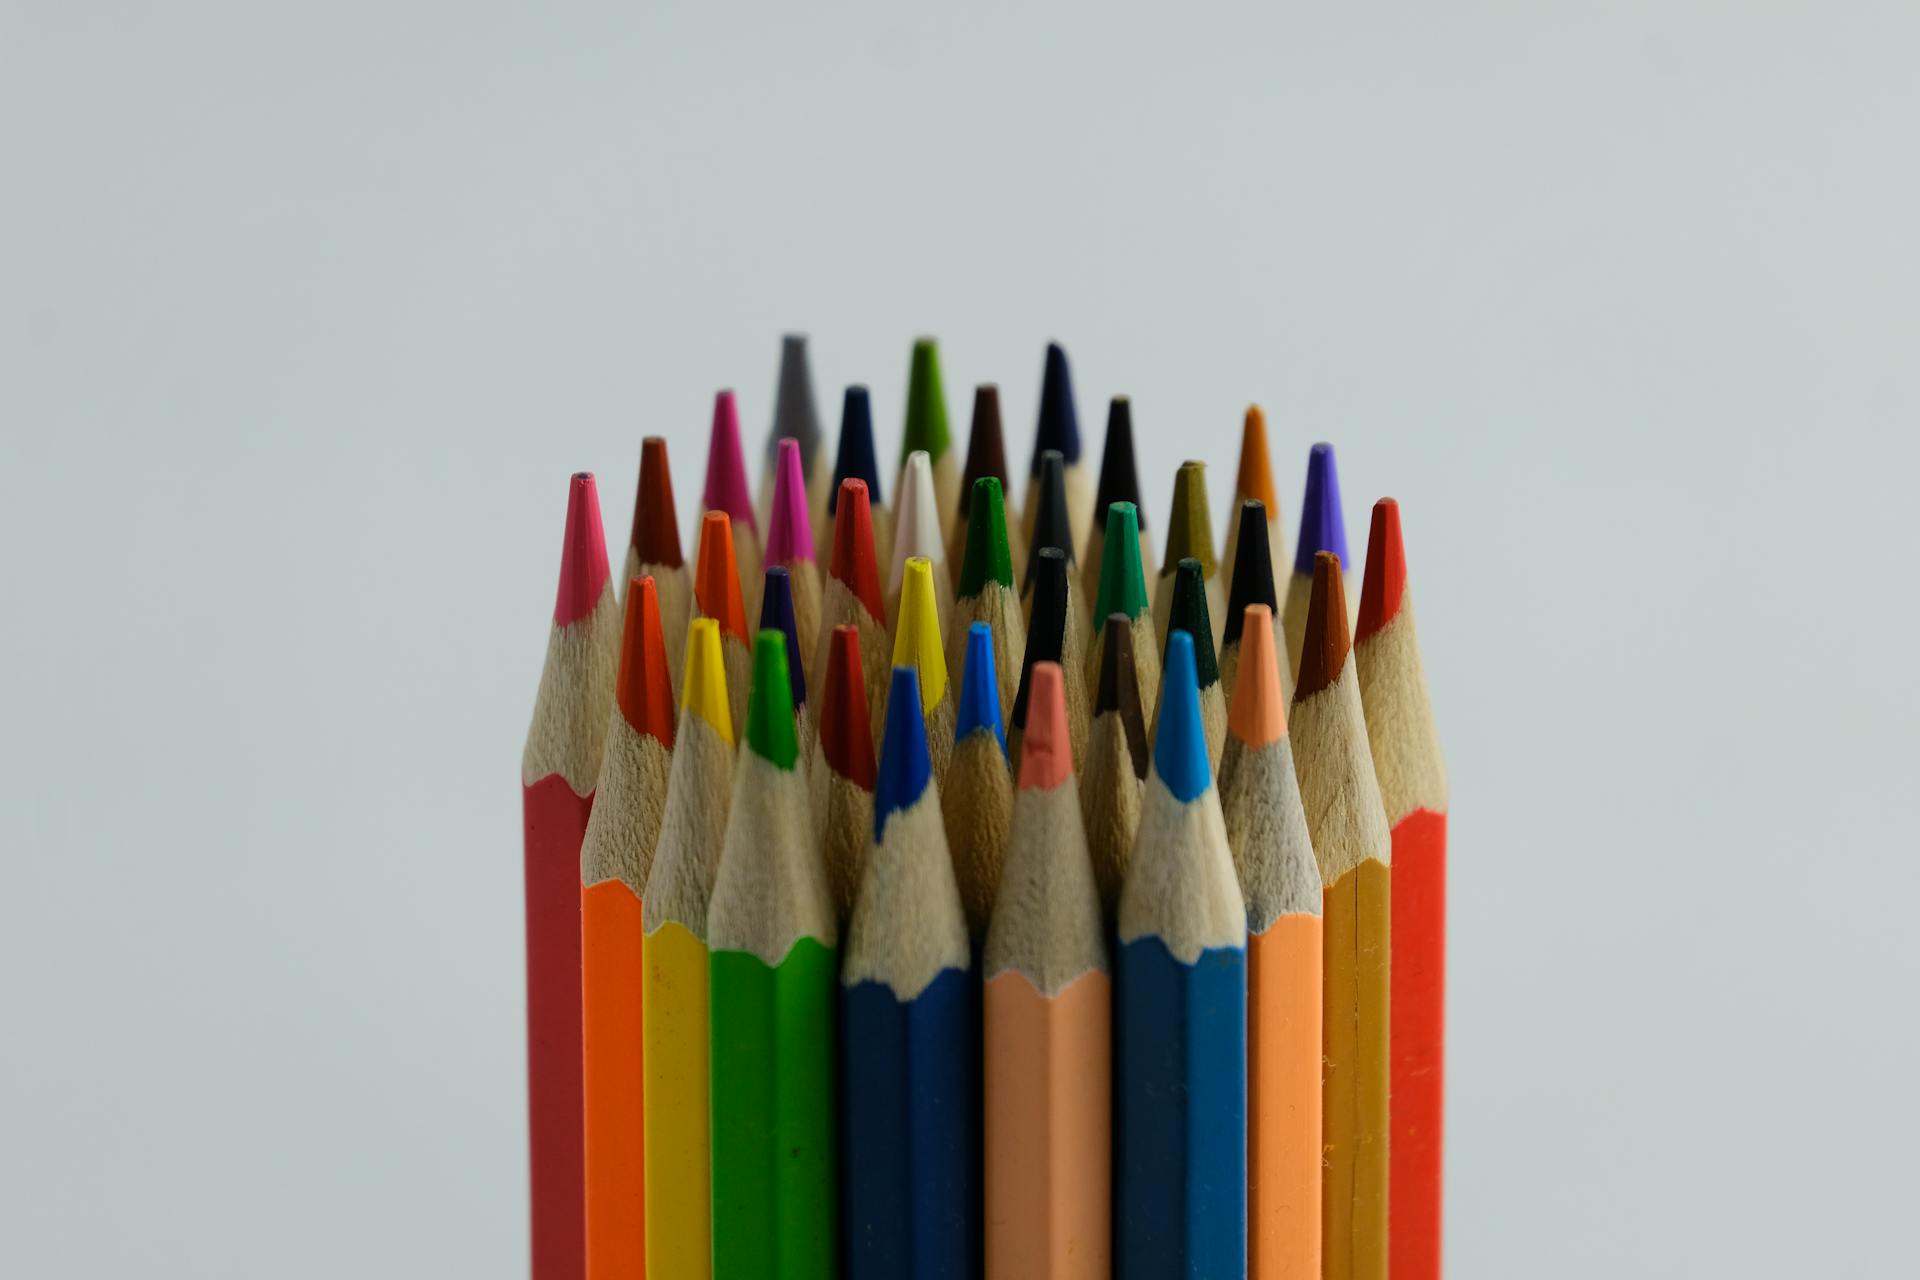 Coloring Pencils on White Background